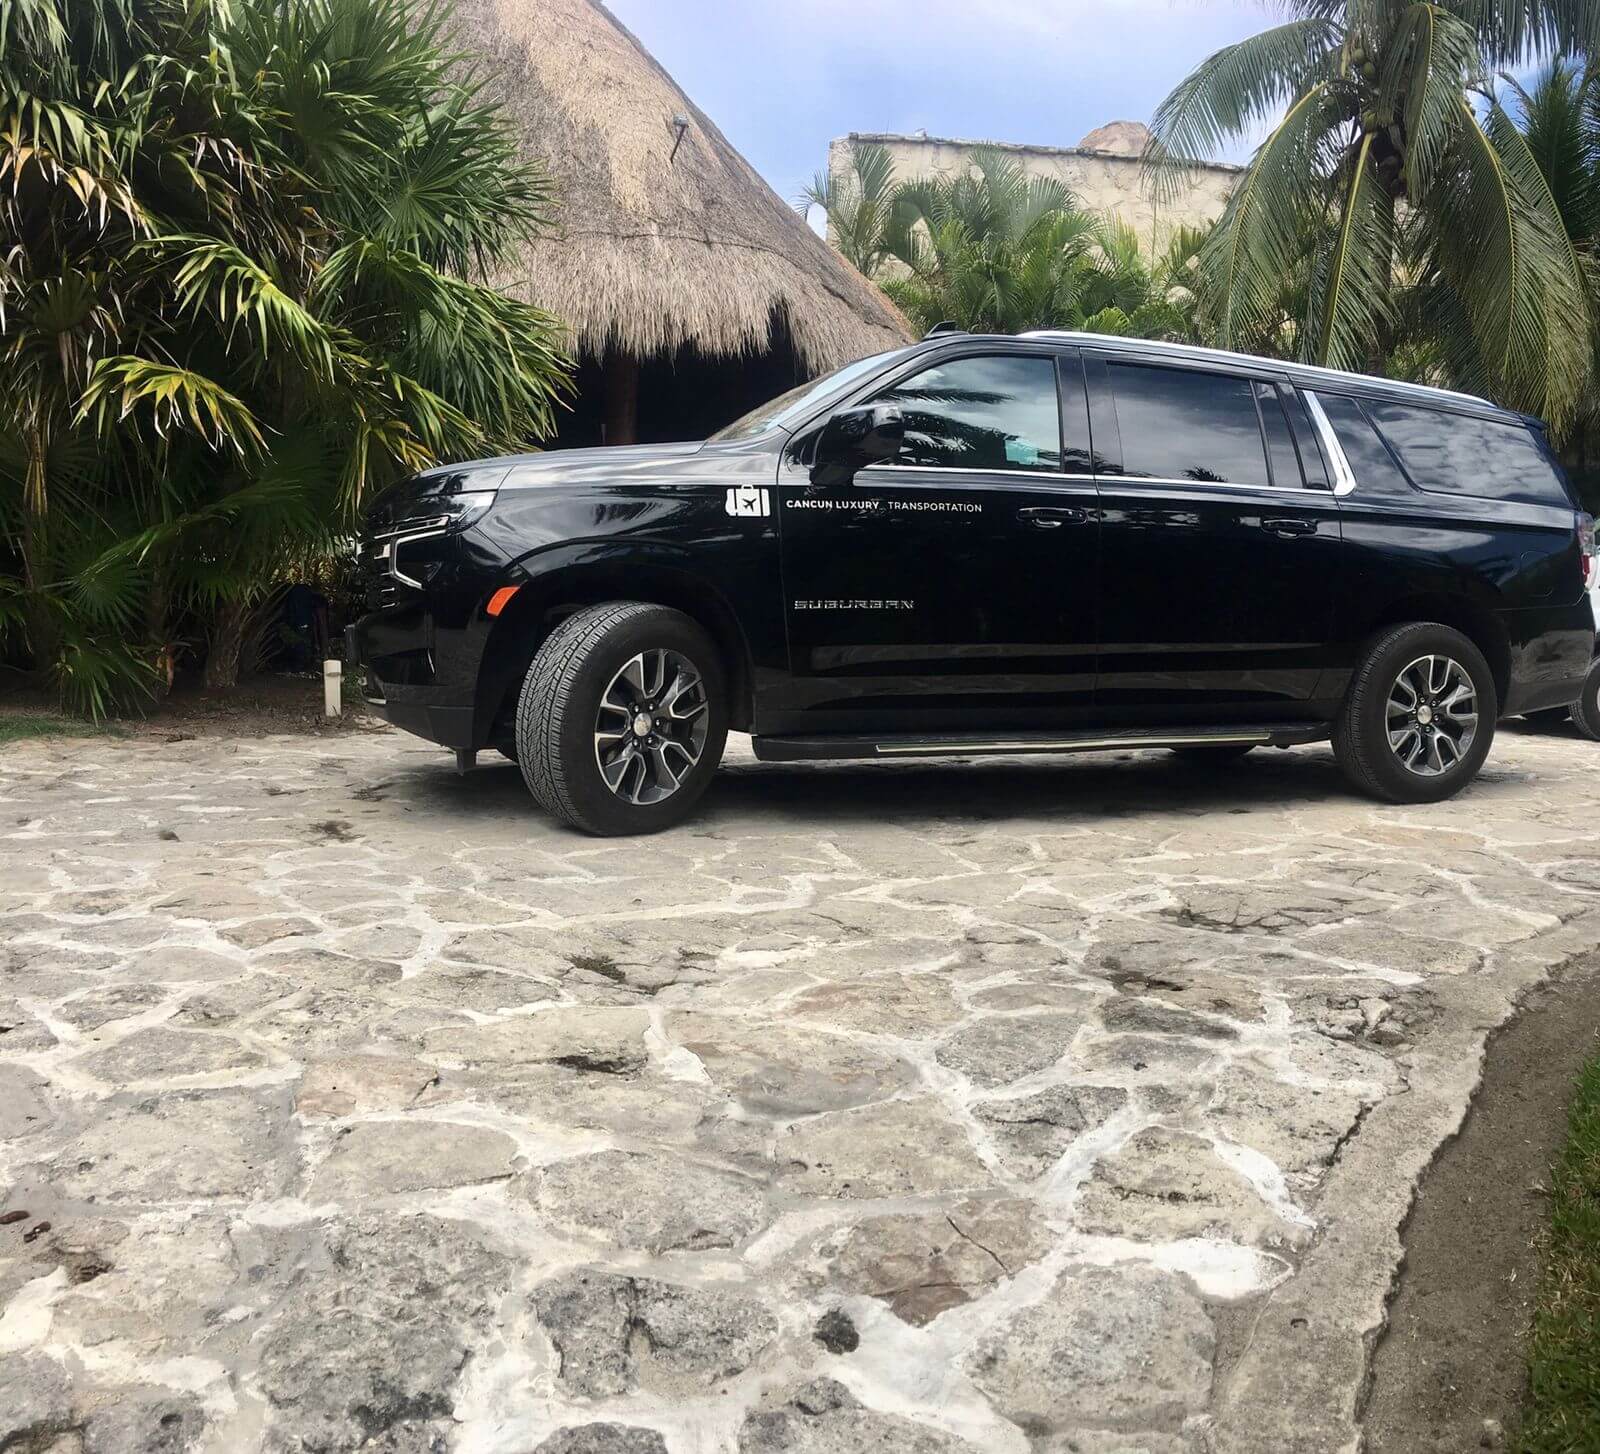 Luxury black Suburban 2021 parked in front of a palapa